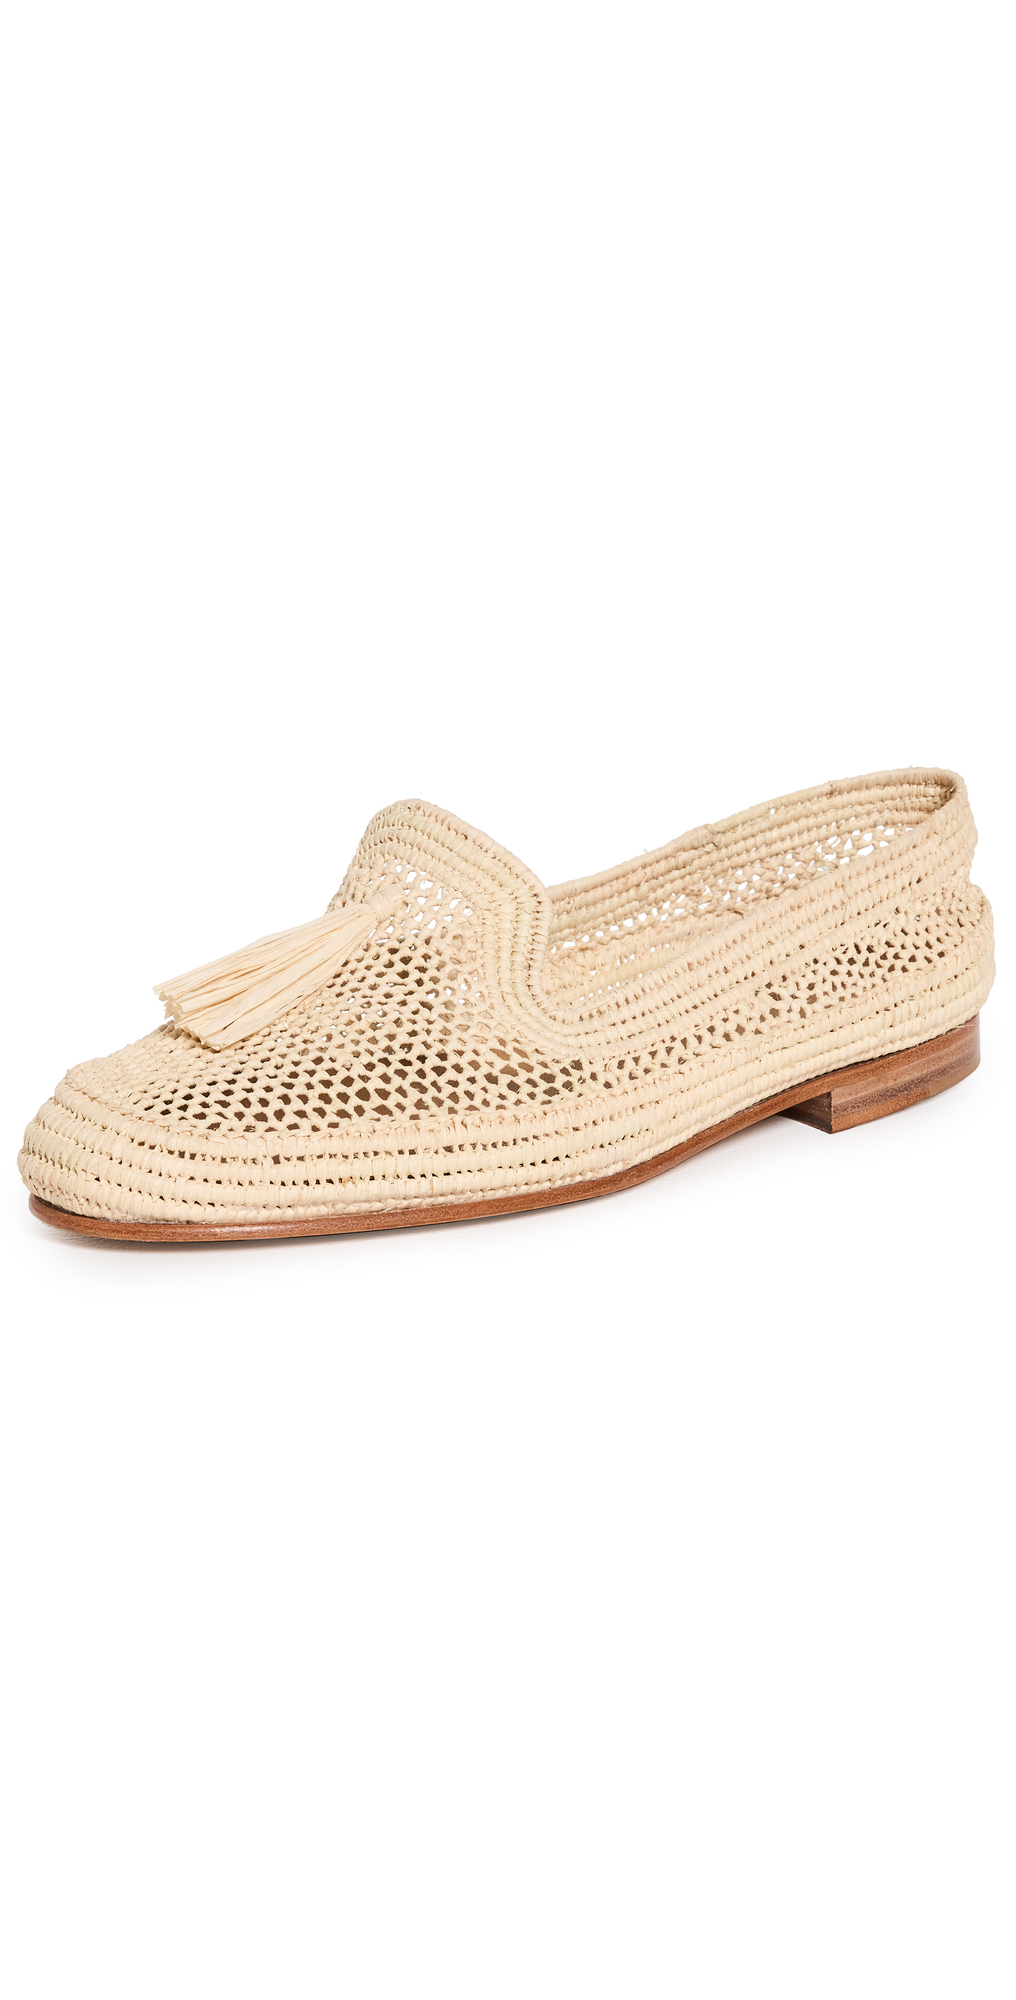 Carrie Forbes Mokka Loafers in natural